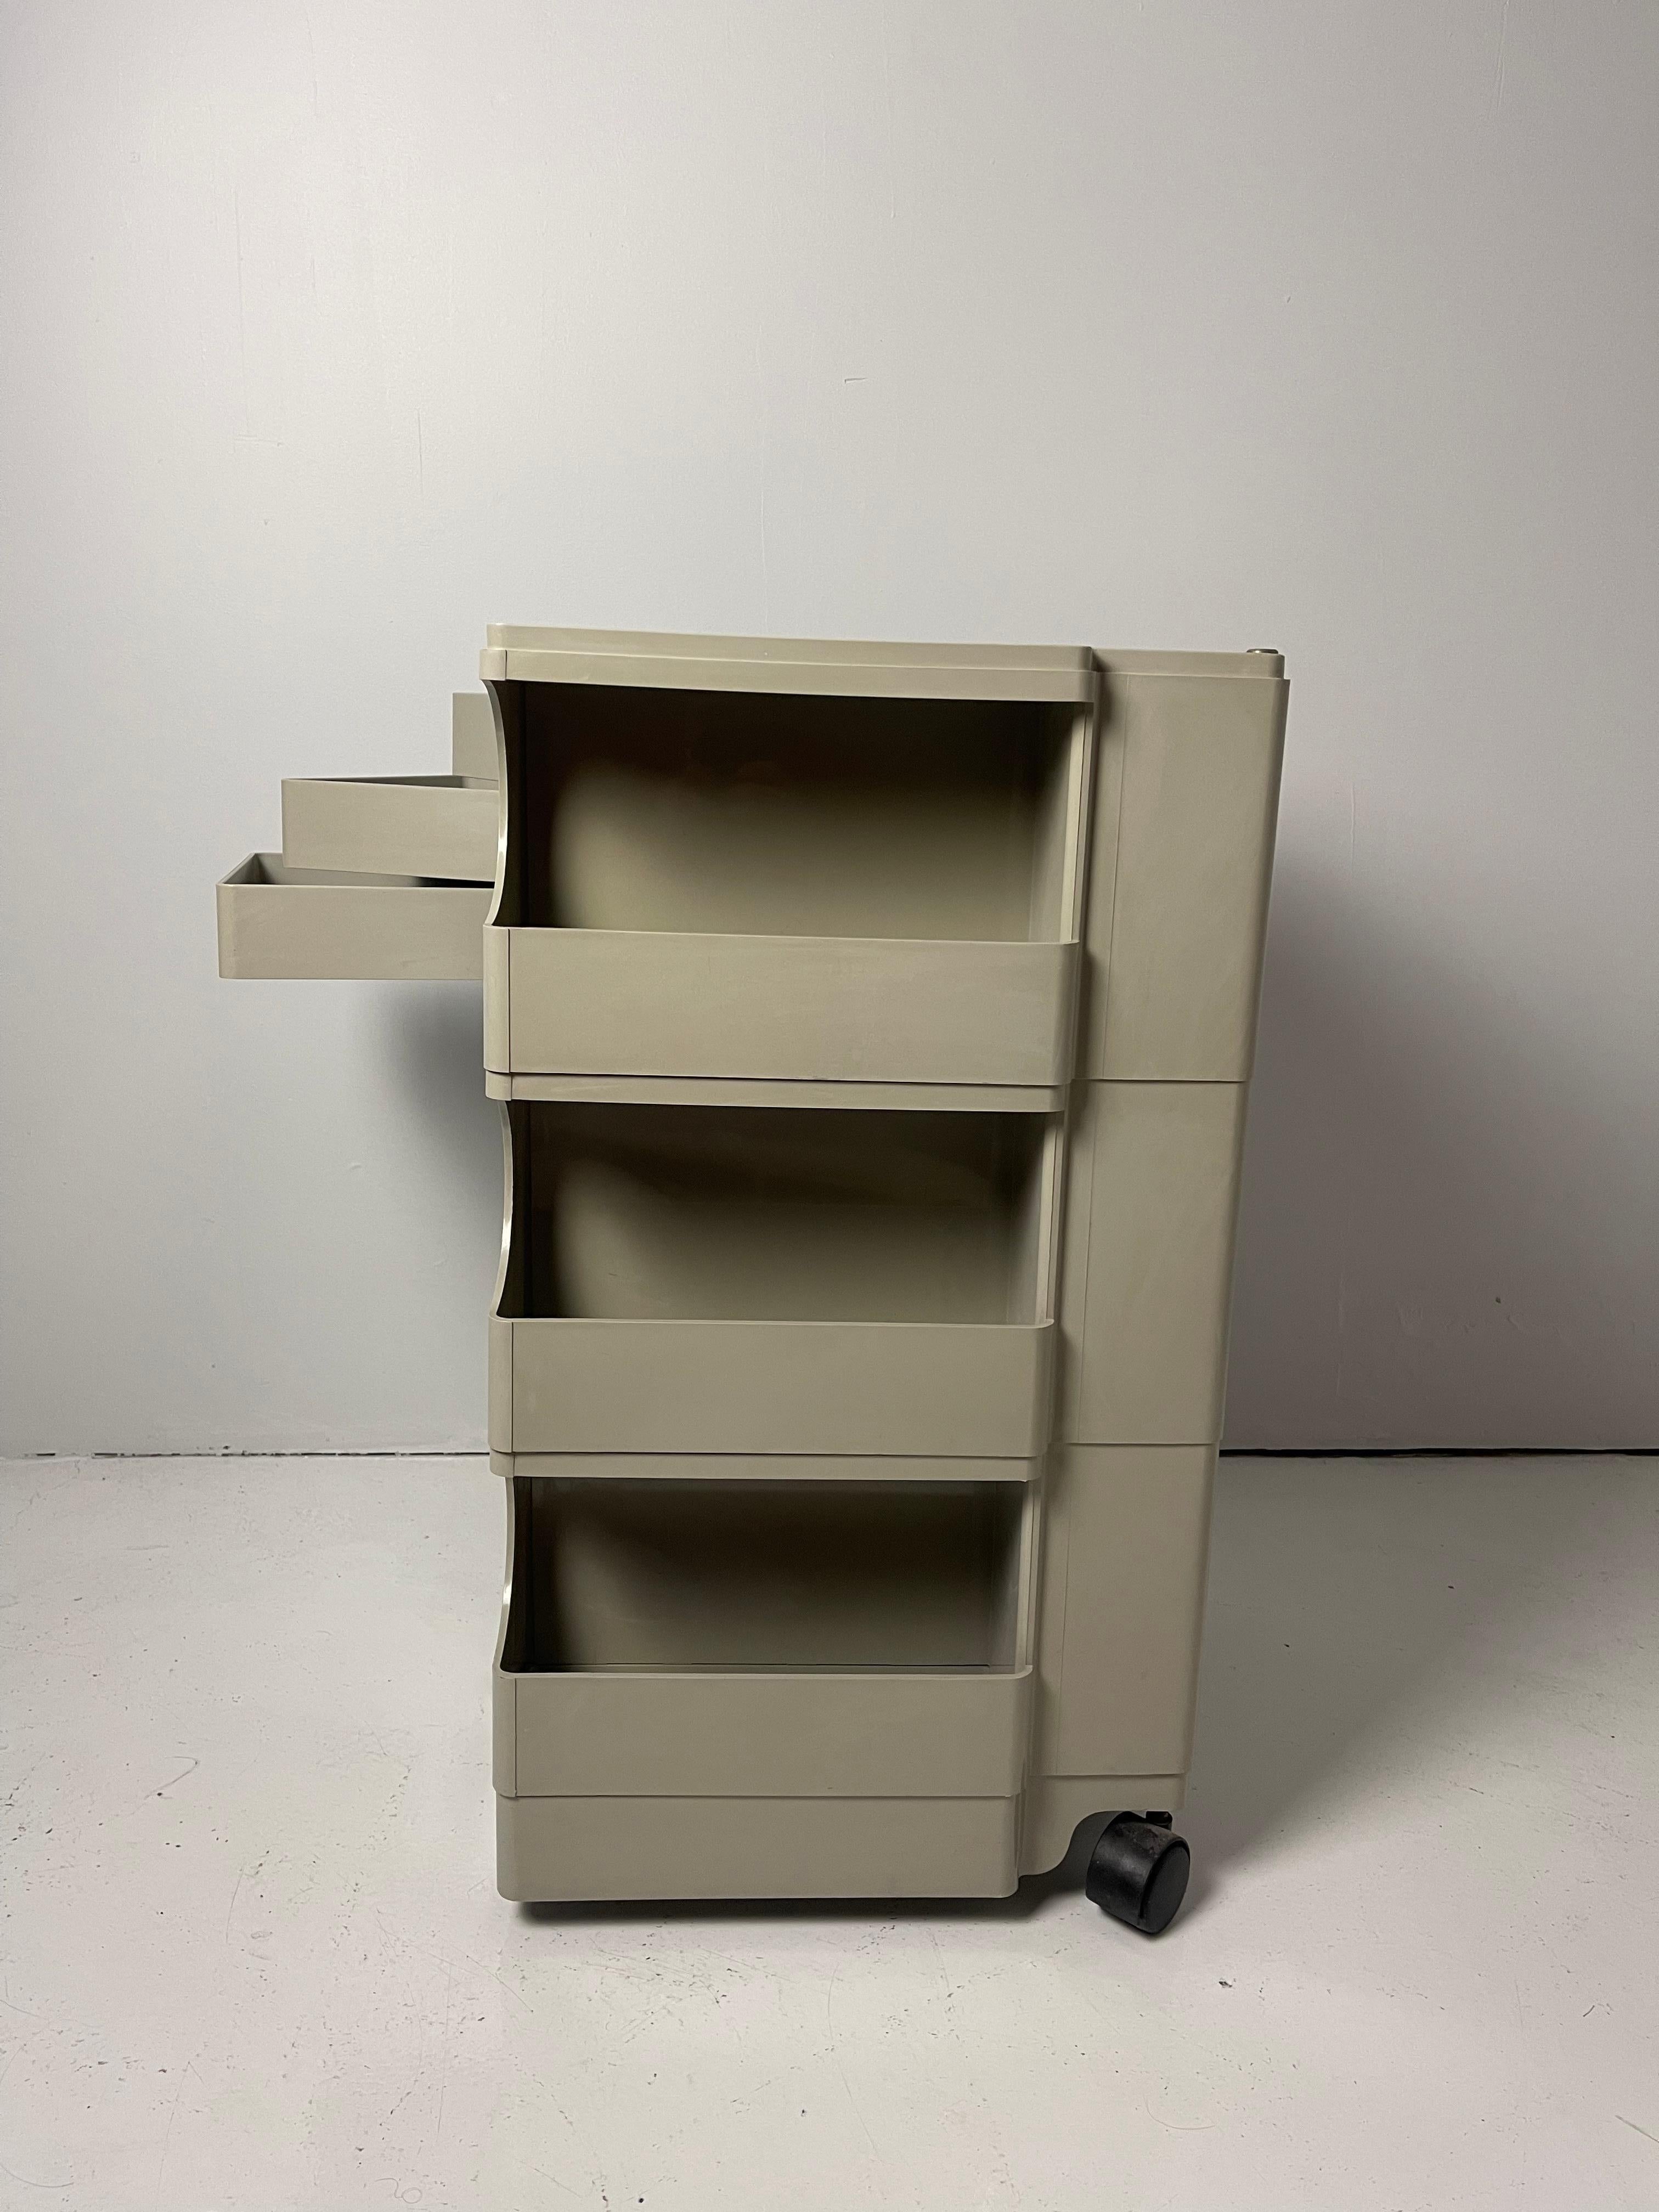 Vintage gray Boby cart by Joe Colombo for Bieffelplast. Made in Italy, 1971. Signed.